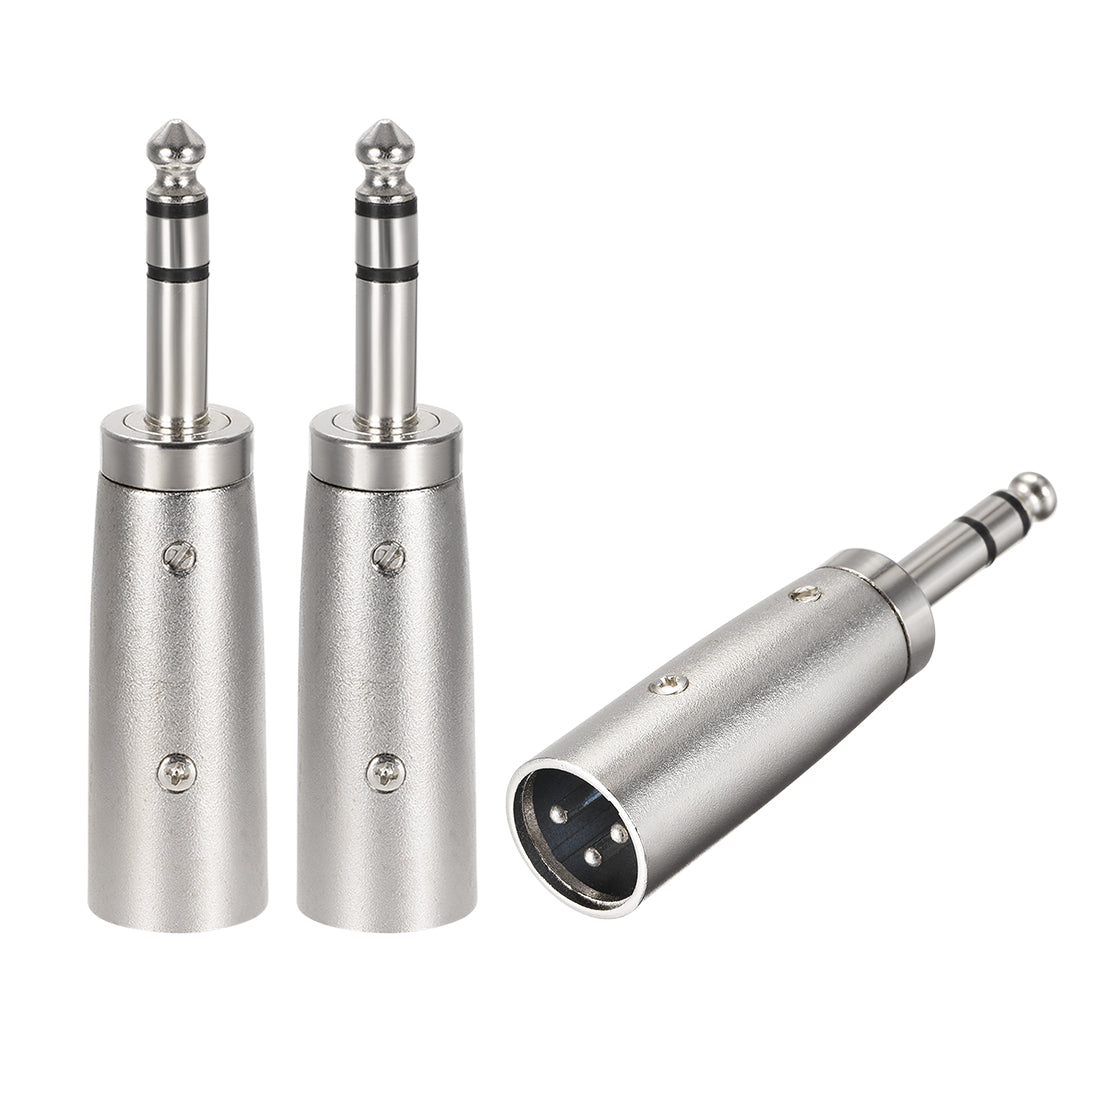 uxcell Uxcell XLR Male to 1/4" Male TRS Adapter,Gender Changer - XLR-M to 6.35mm Coupler	Adapters,Microphones Plug In Audio Connector,Mic Male Plug,3pcs